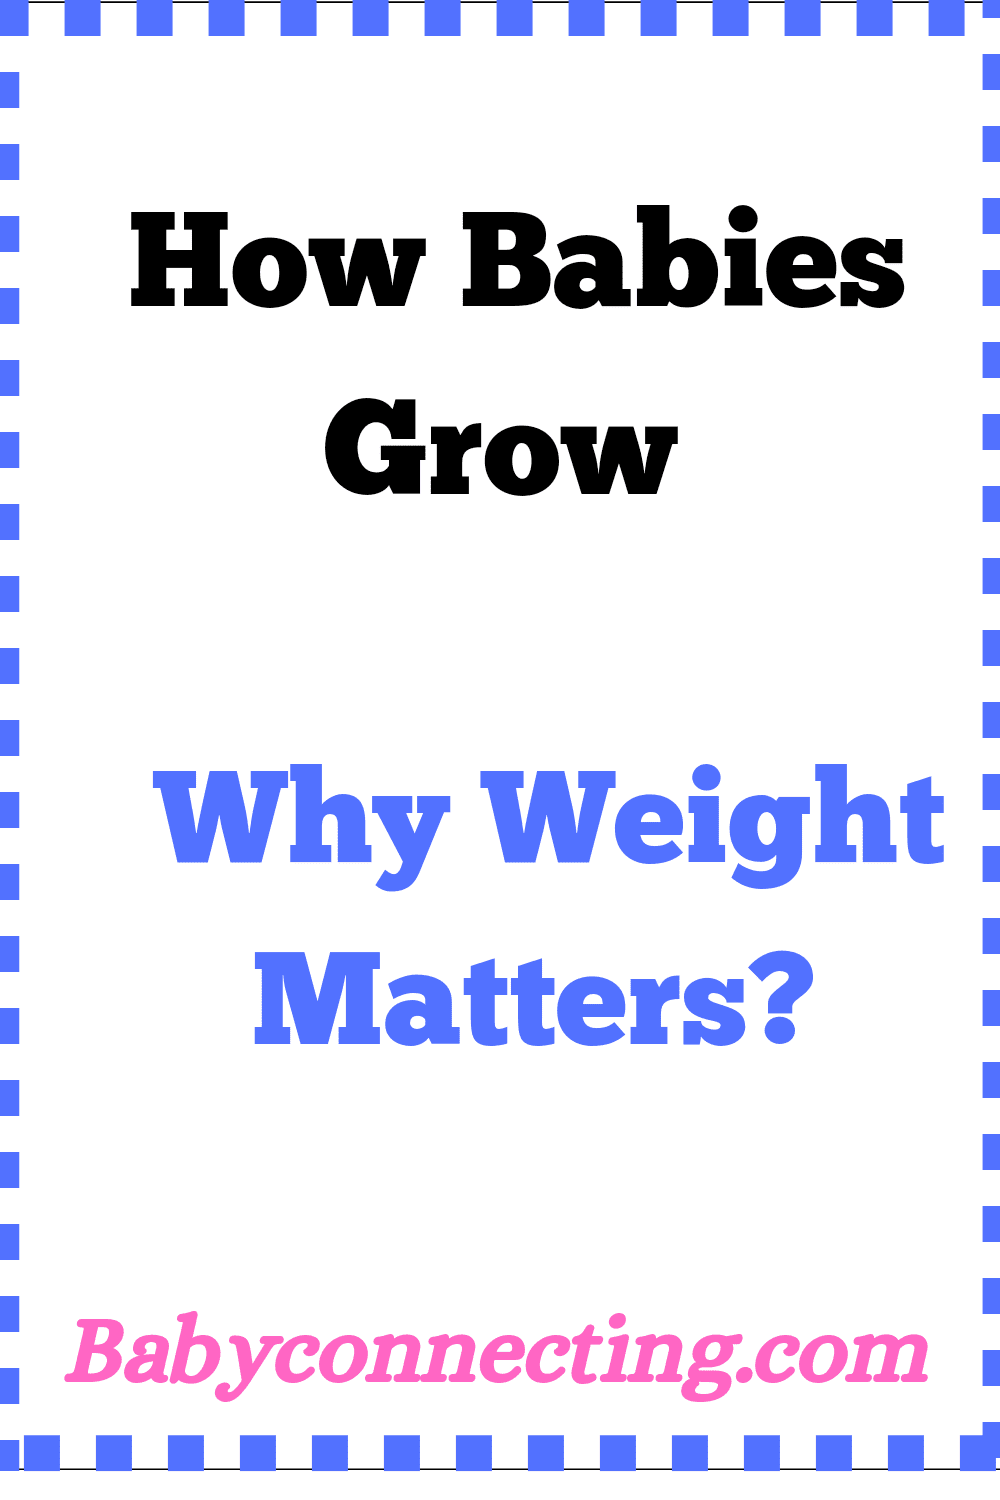 How Babies Grow and Why Weight Matters